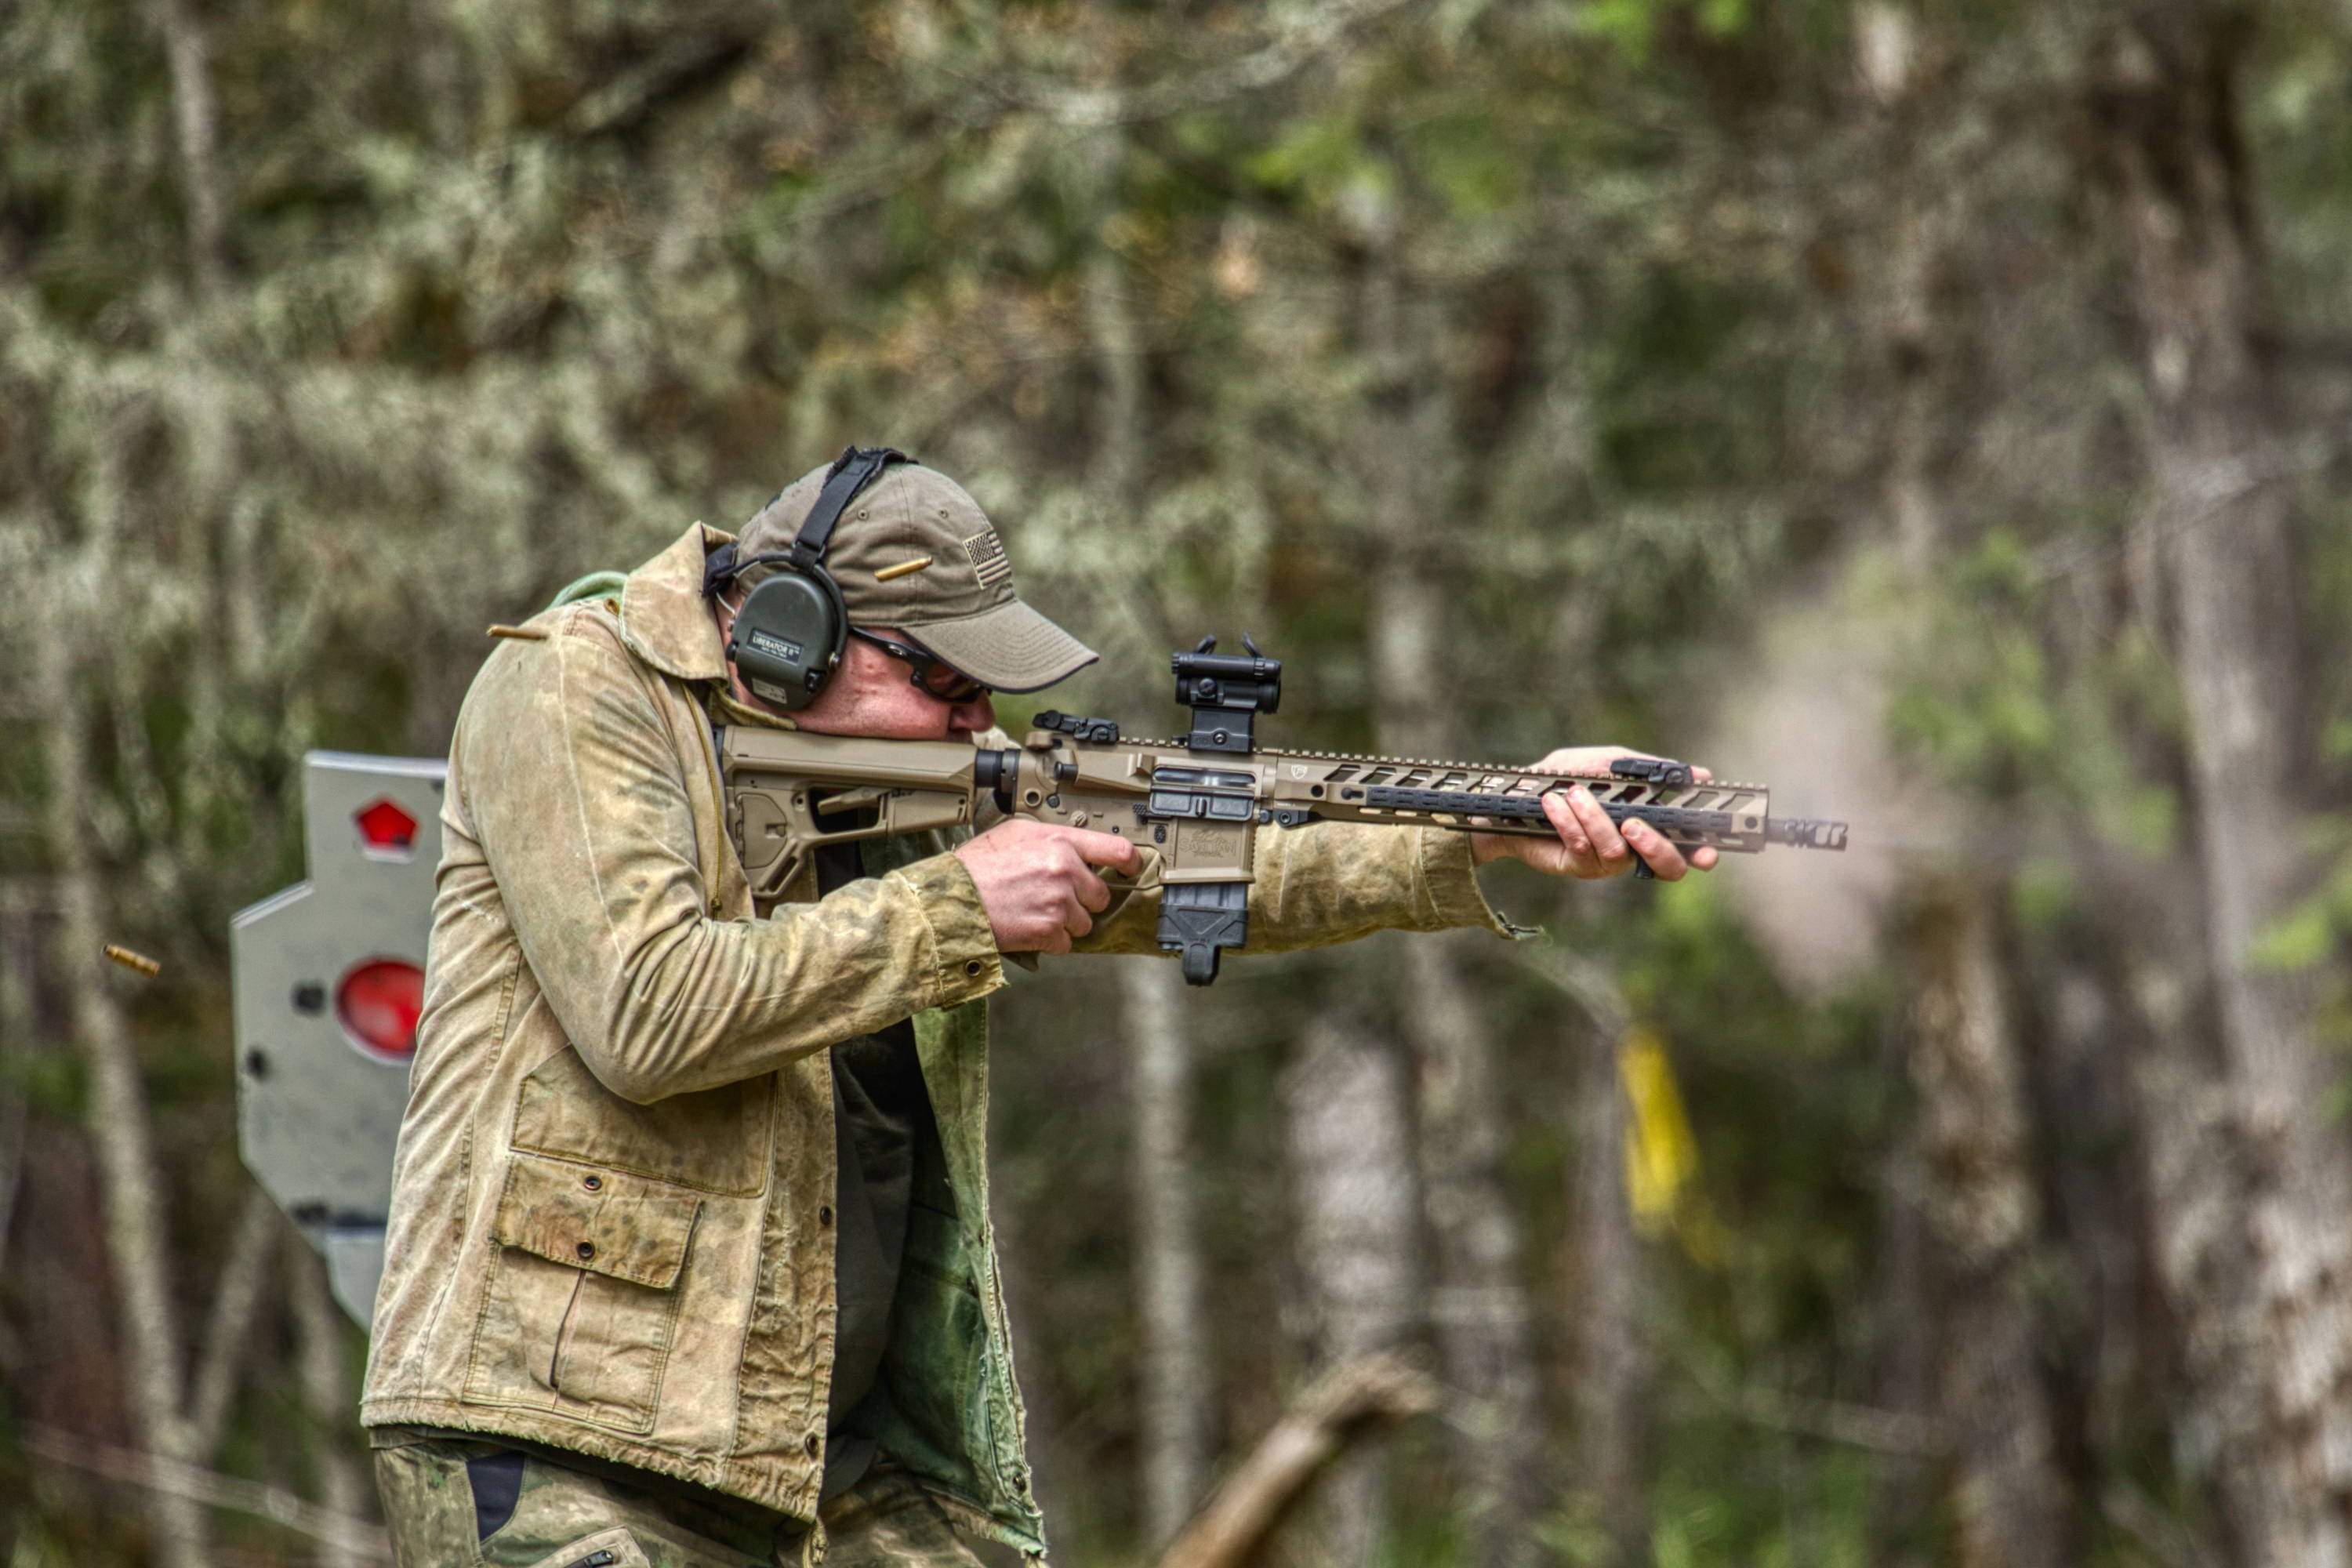 4 TIPS TO TRANSITION TO A RED DOT SIGHT